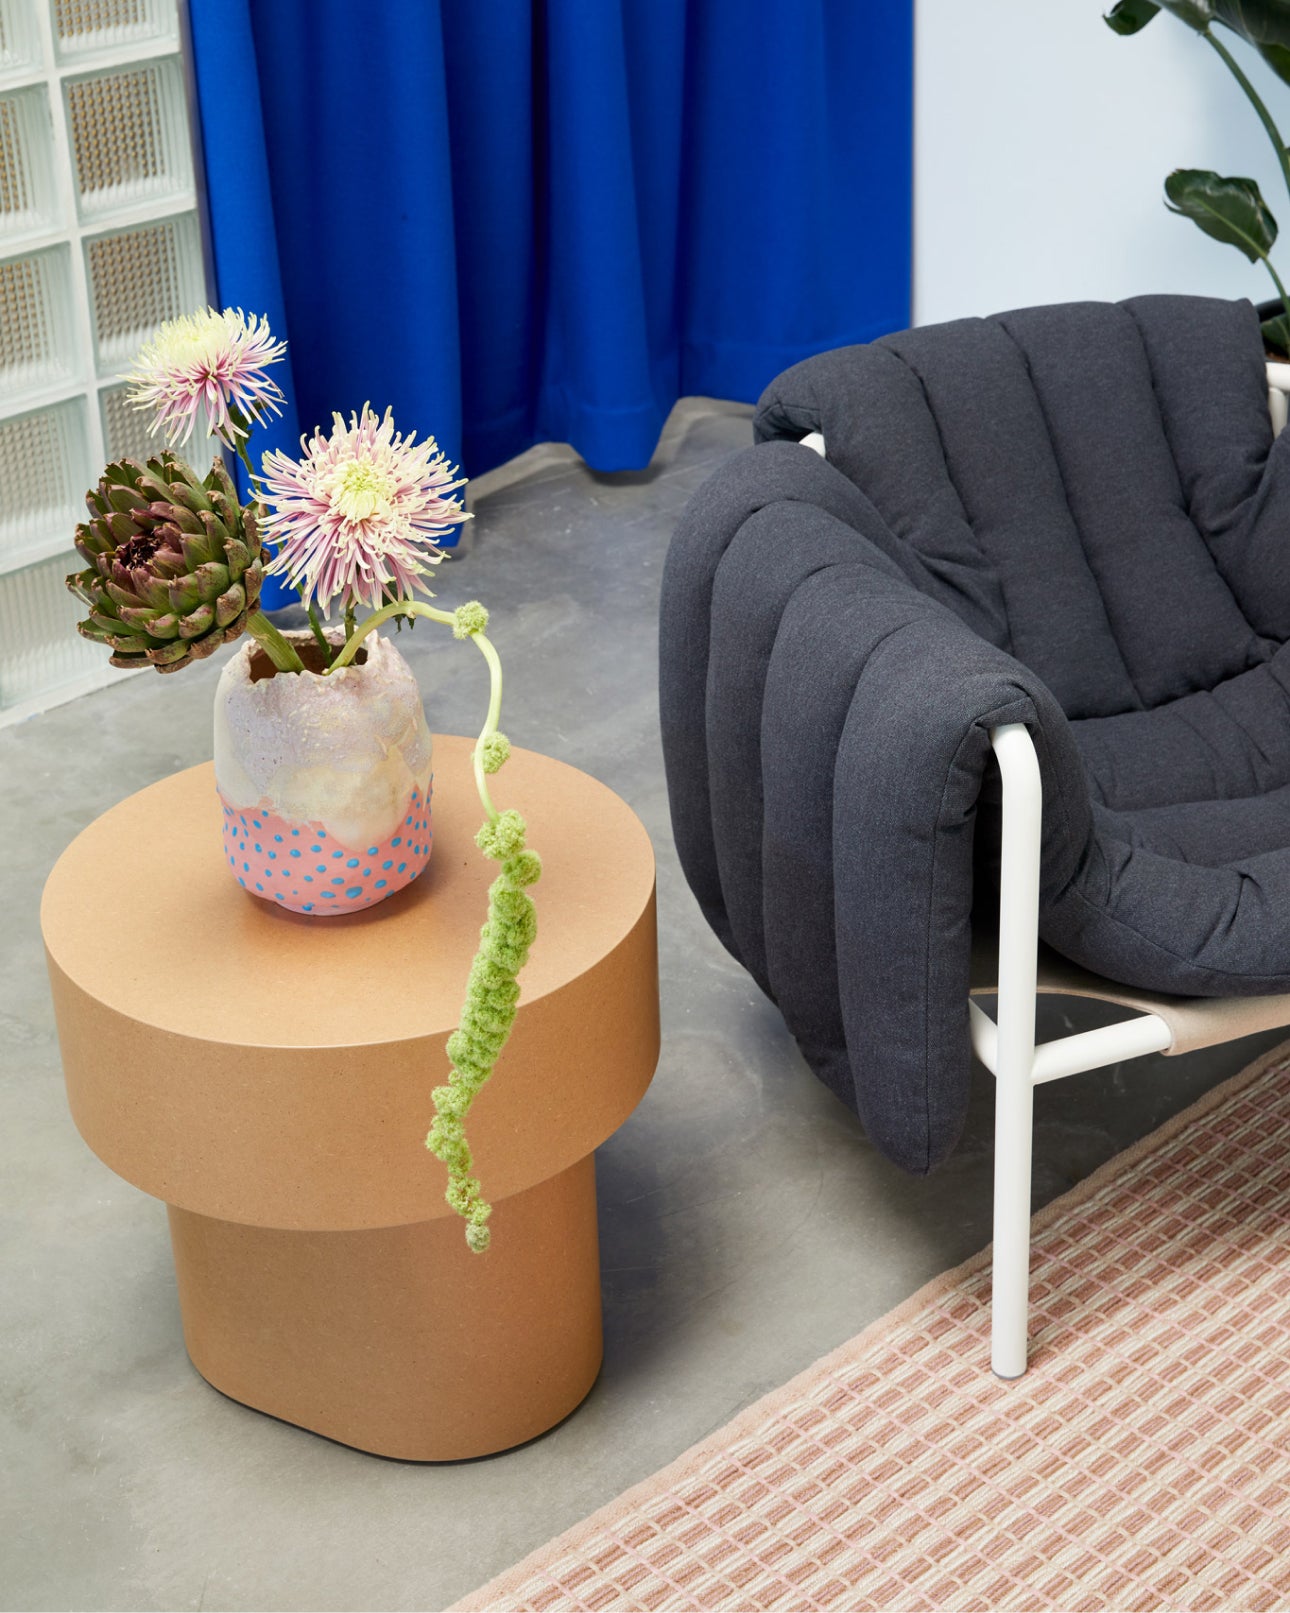 Hem - An image from our LA Showroom featuring Puffy Lounge Chair, Rope Rug, and Stump Side Table Natural.